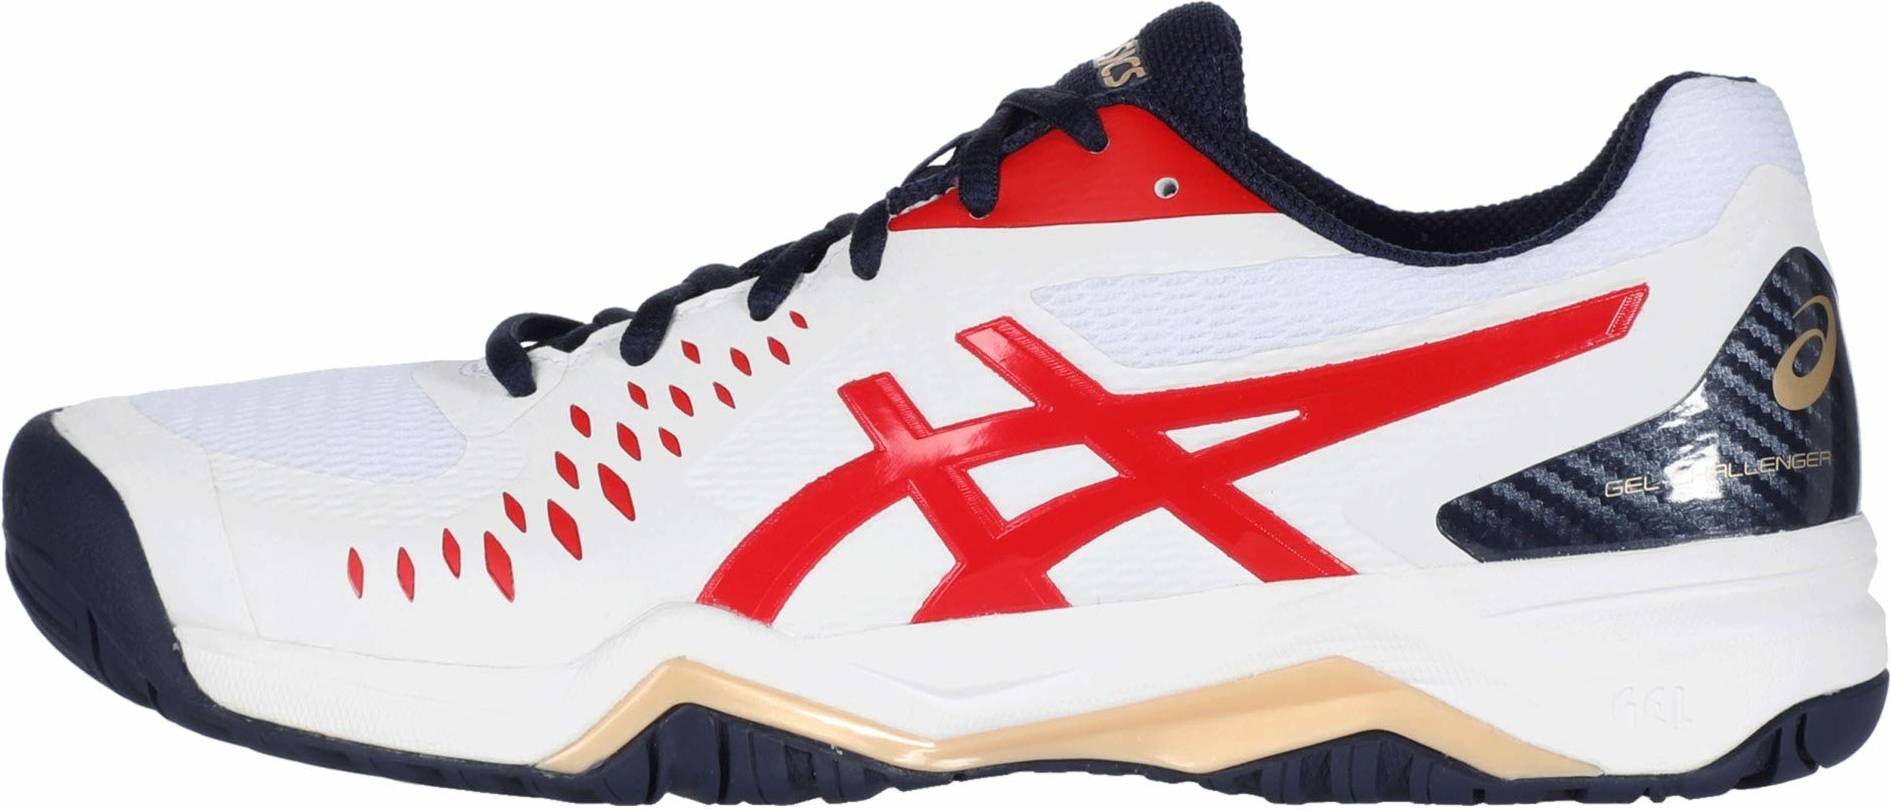 axis tennis shoes